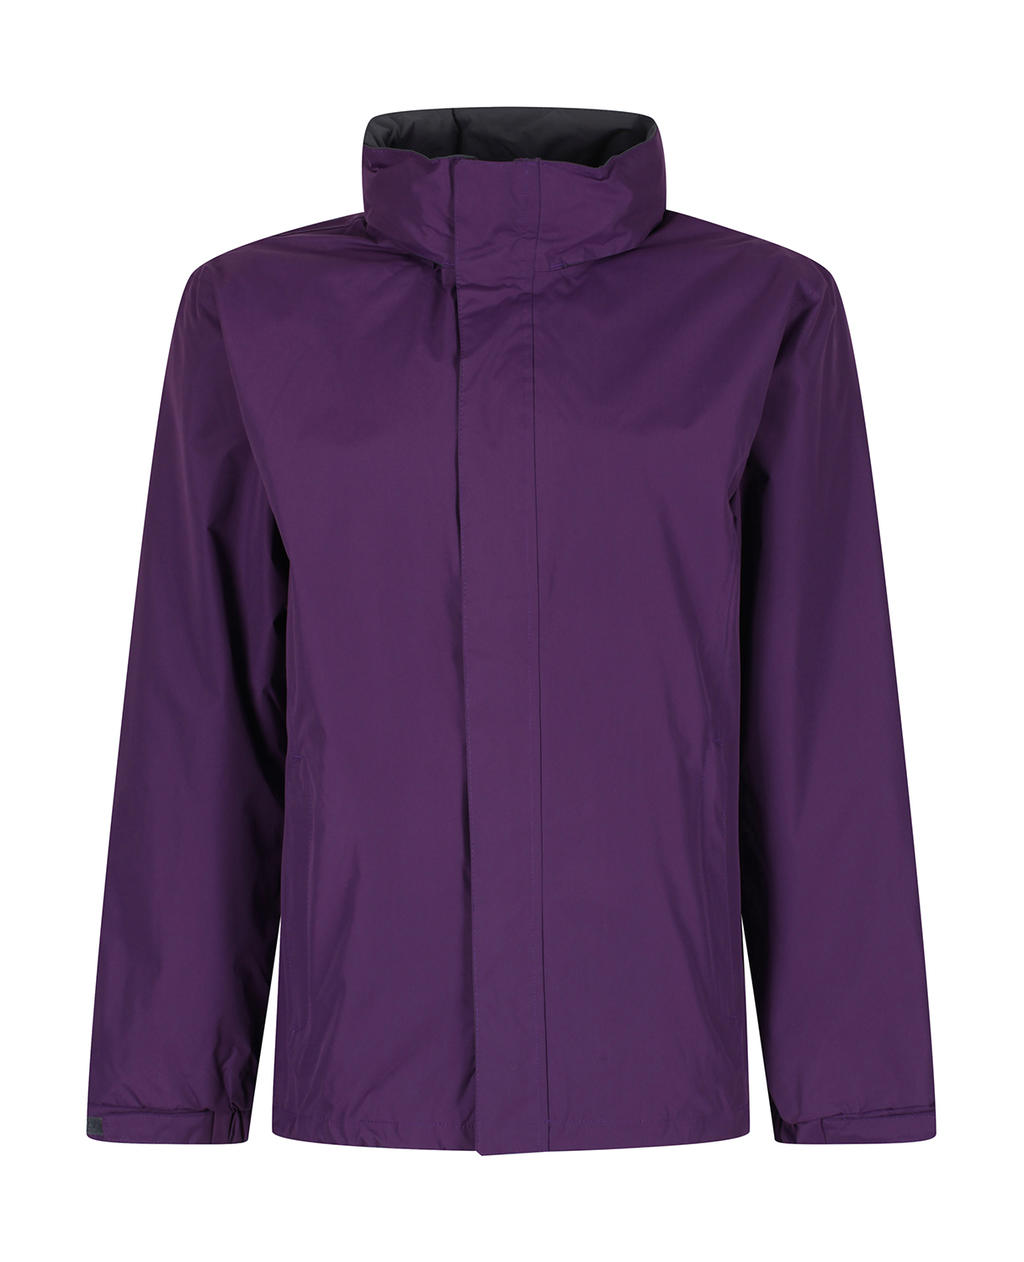  Ardmore Jacket in Farbe Majestic Purple/Seal Grey